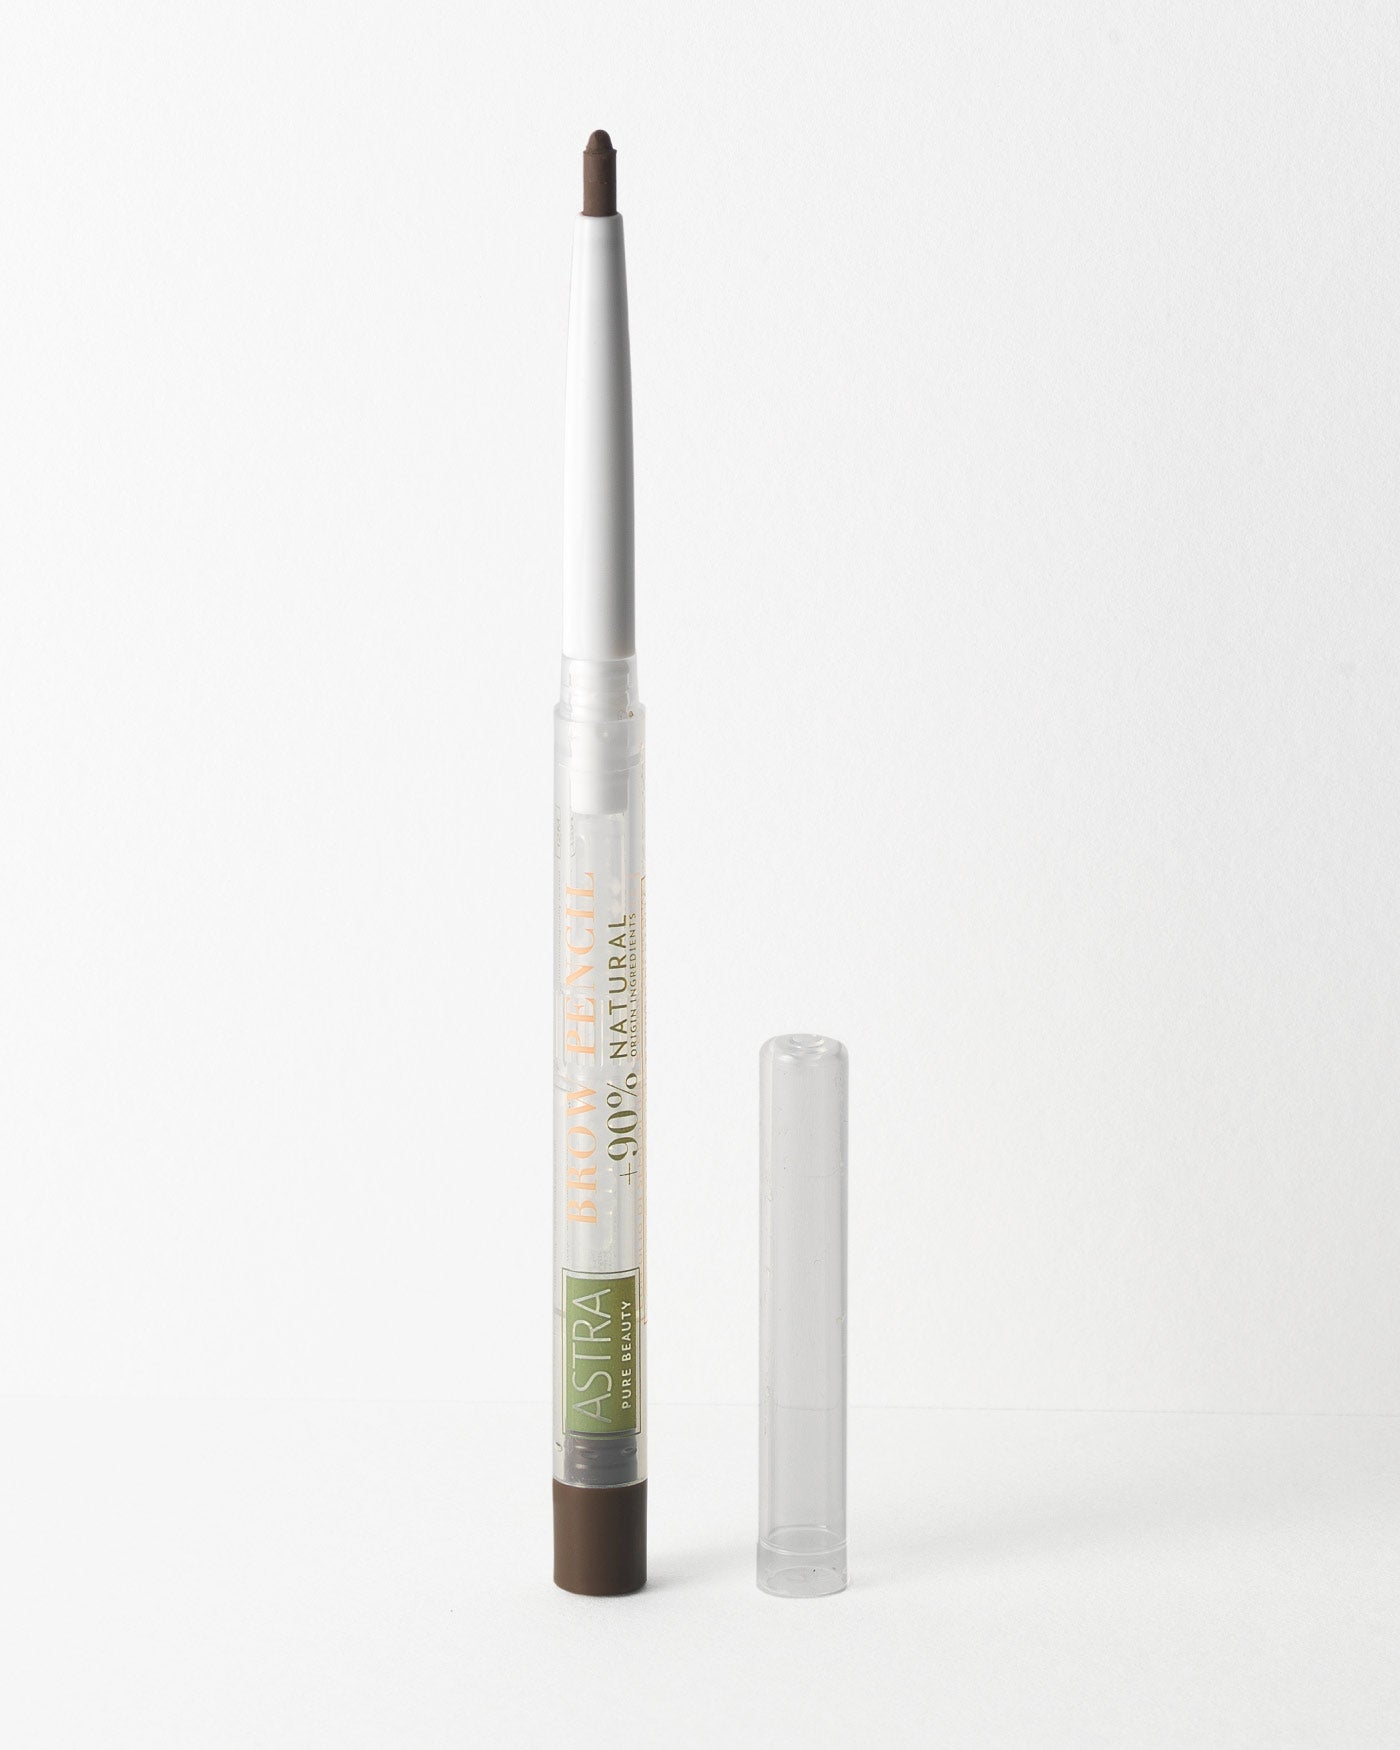 PURE BEAUTY BROW PENCIL - 03 - Brunette - Astra Make-Up